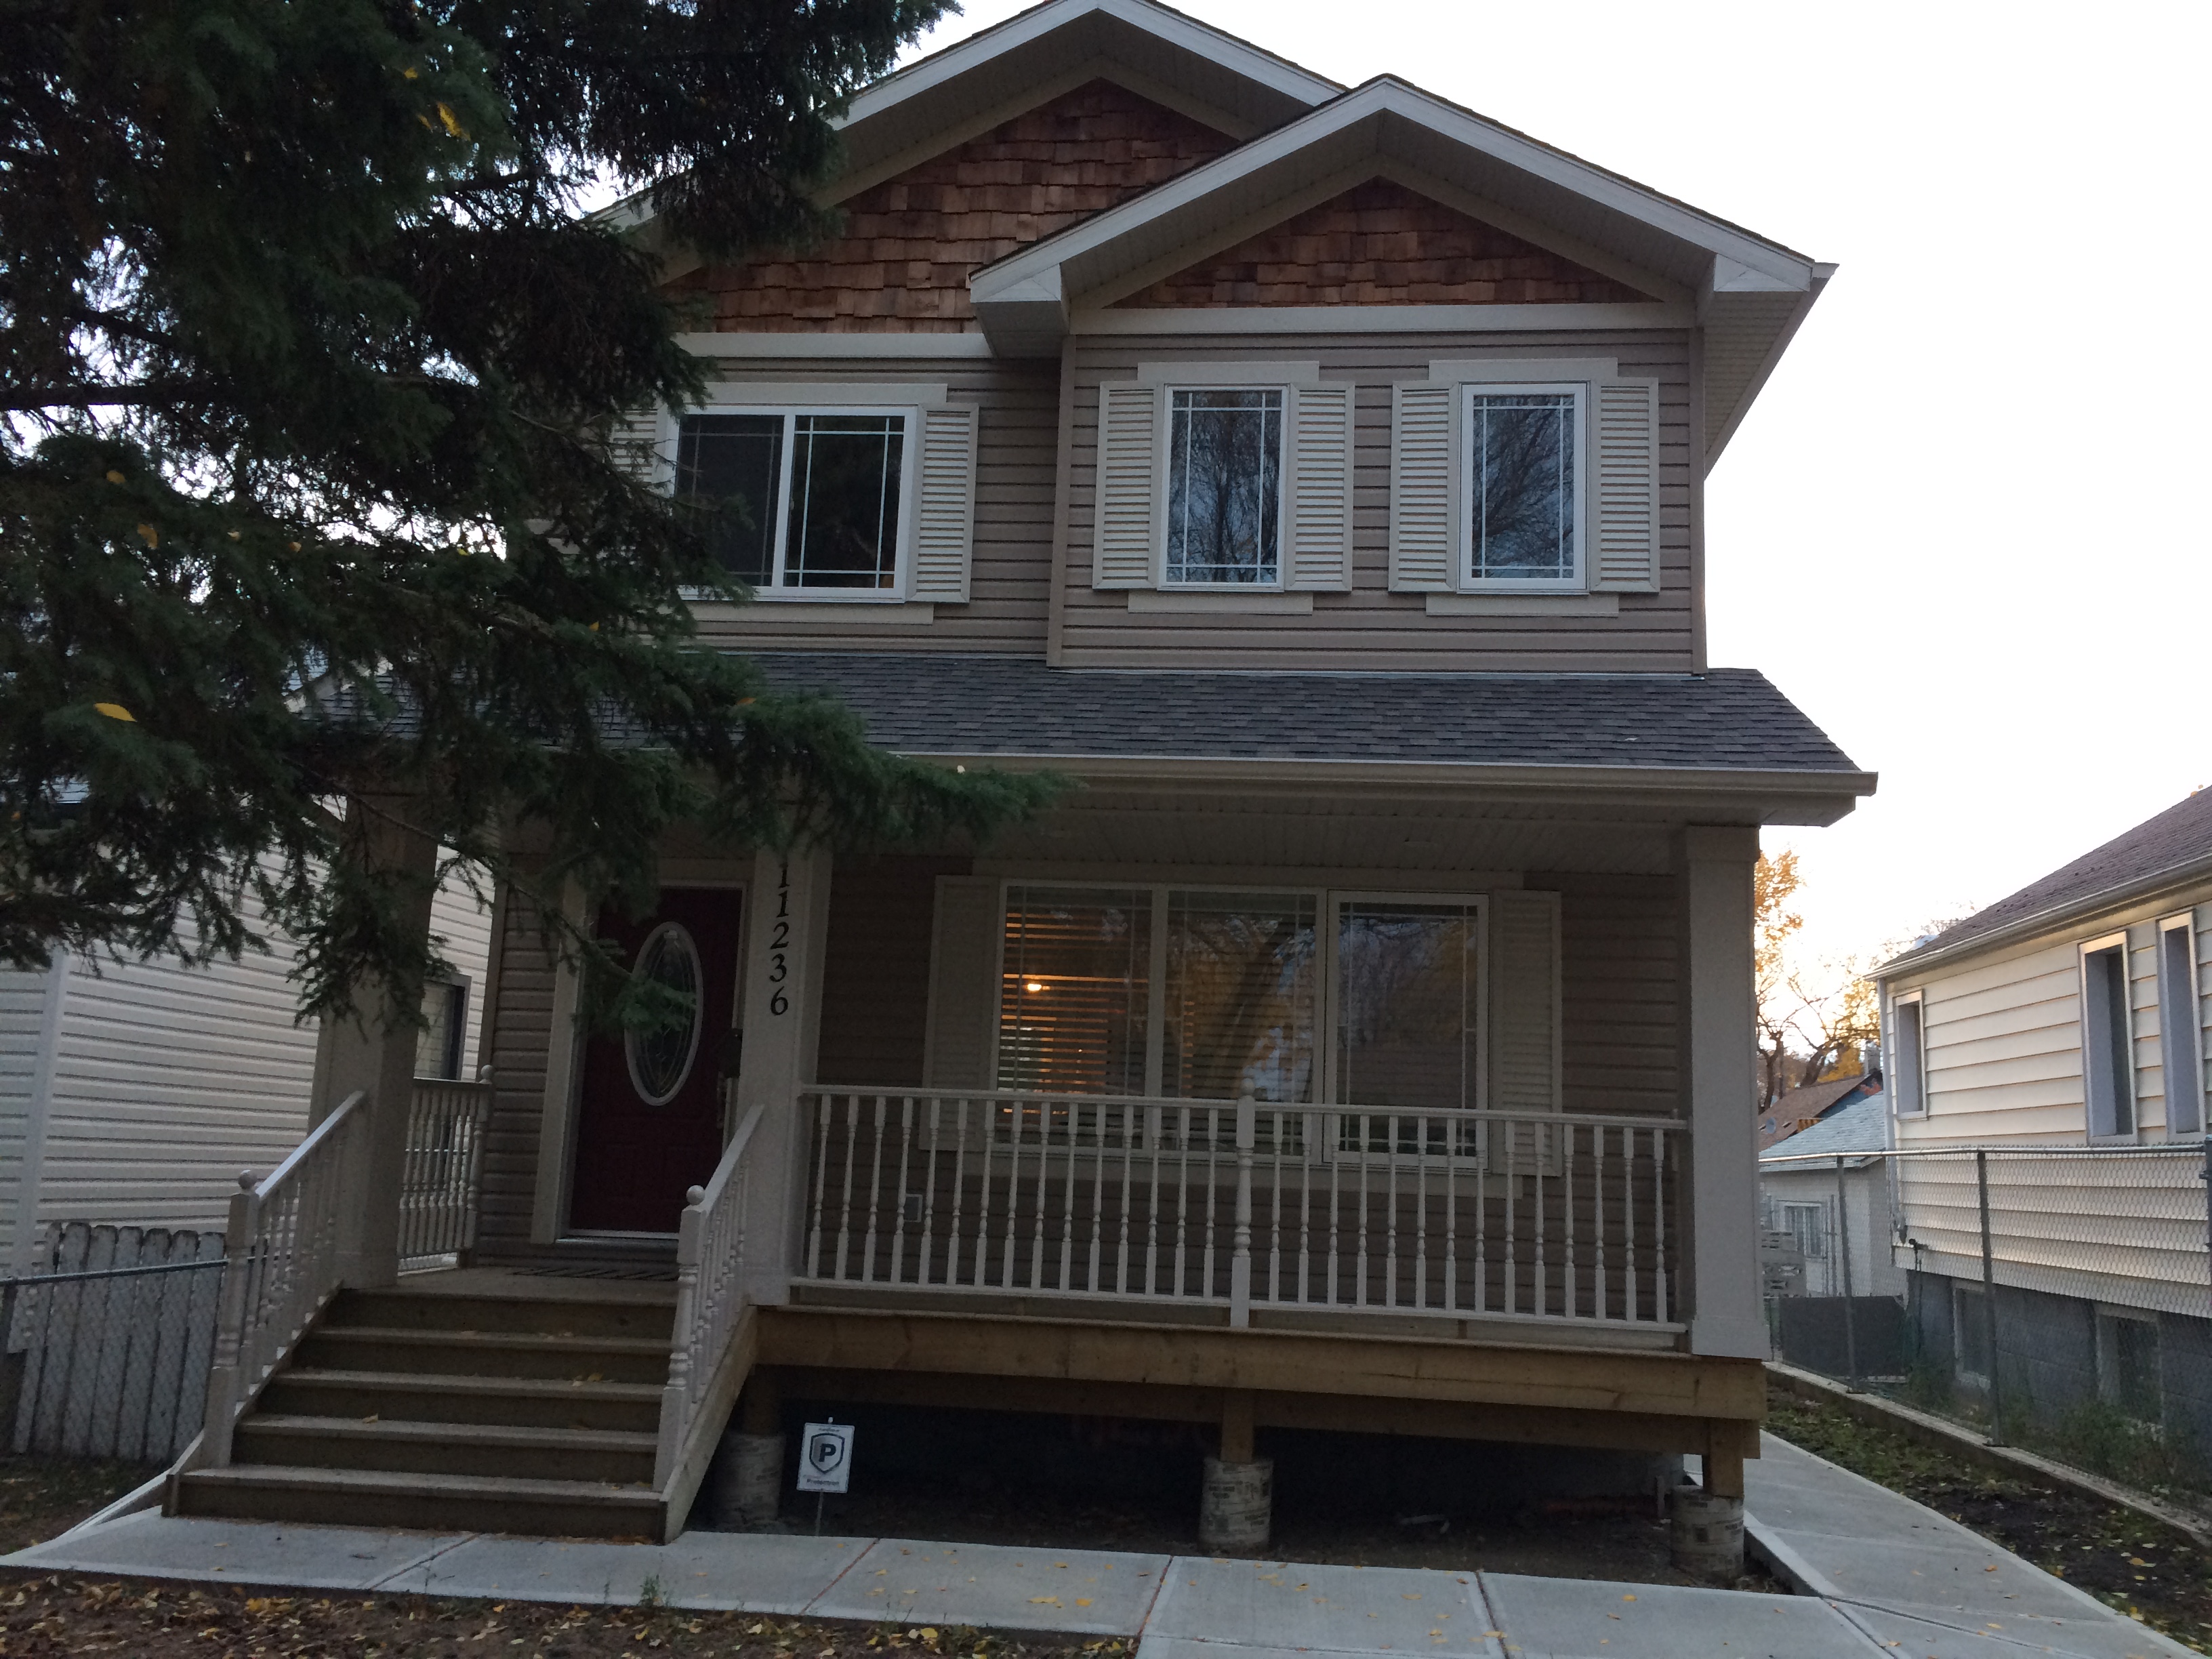 3 Bedroom house, Newly Built. PARKDALE, $1799